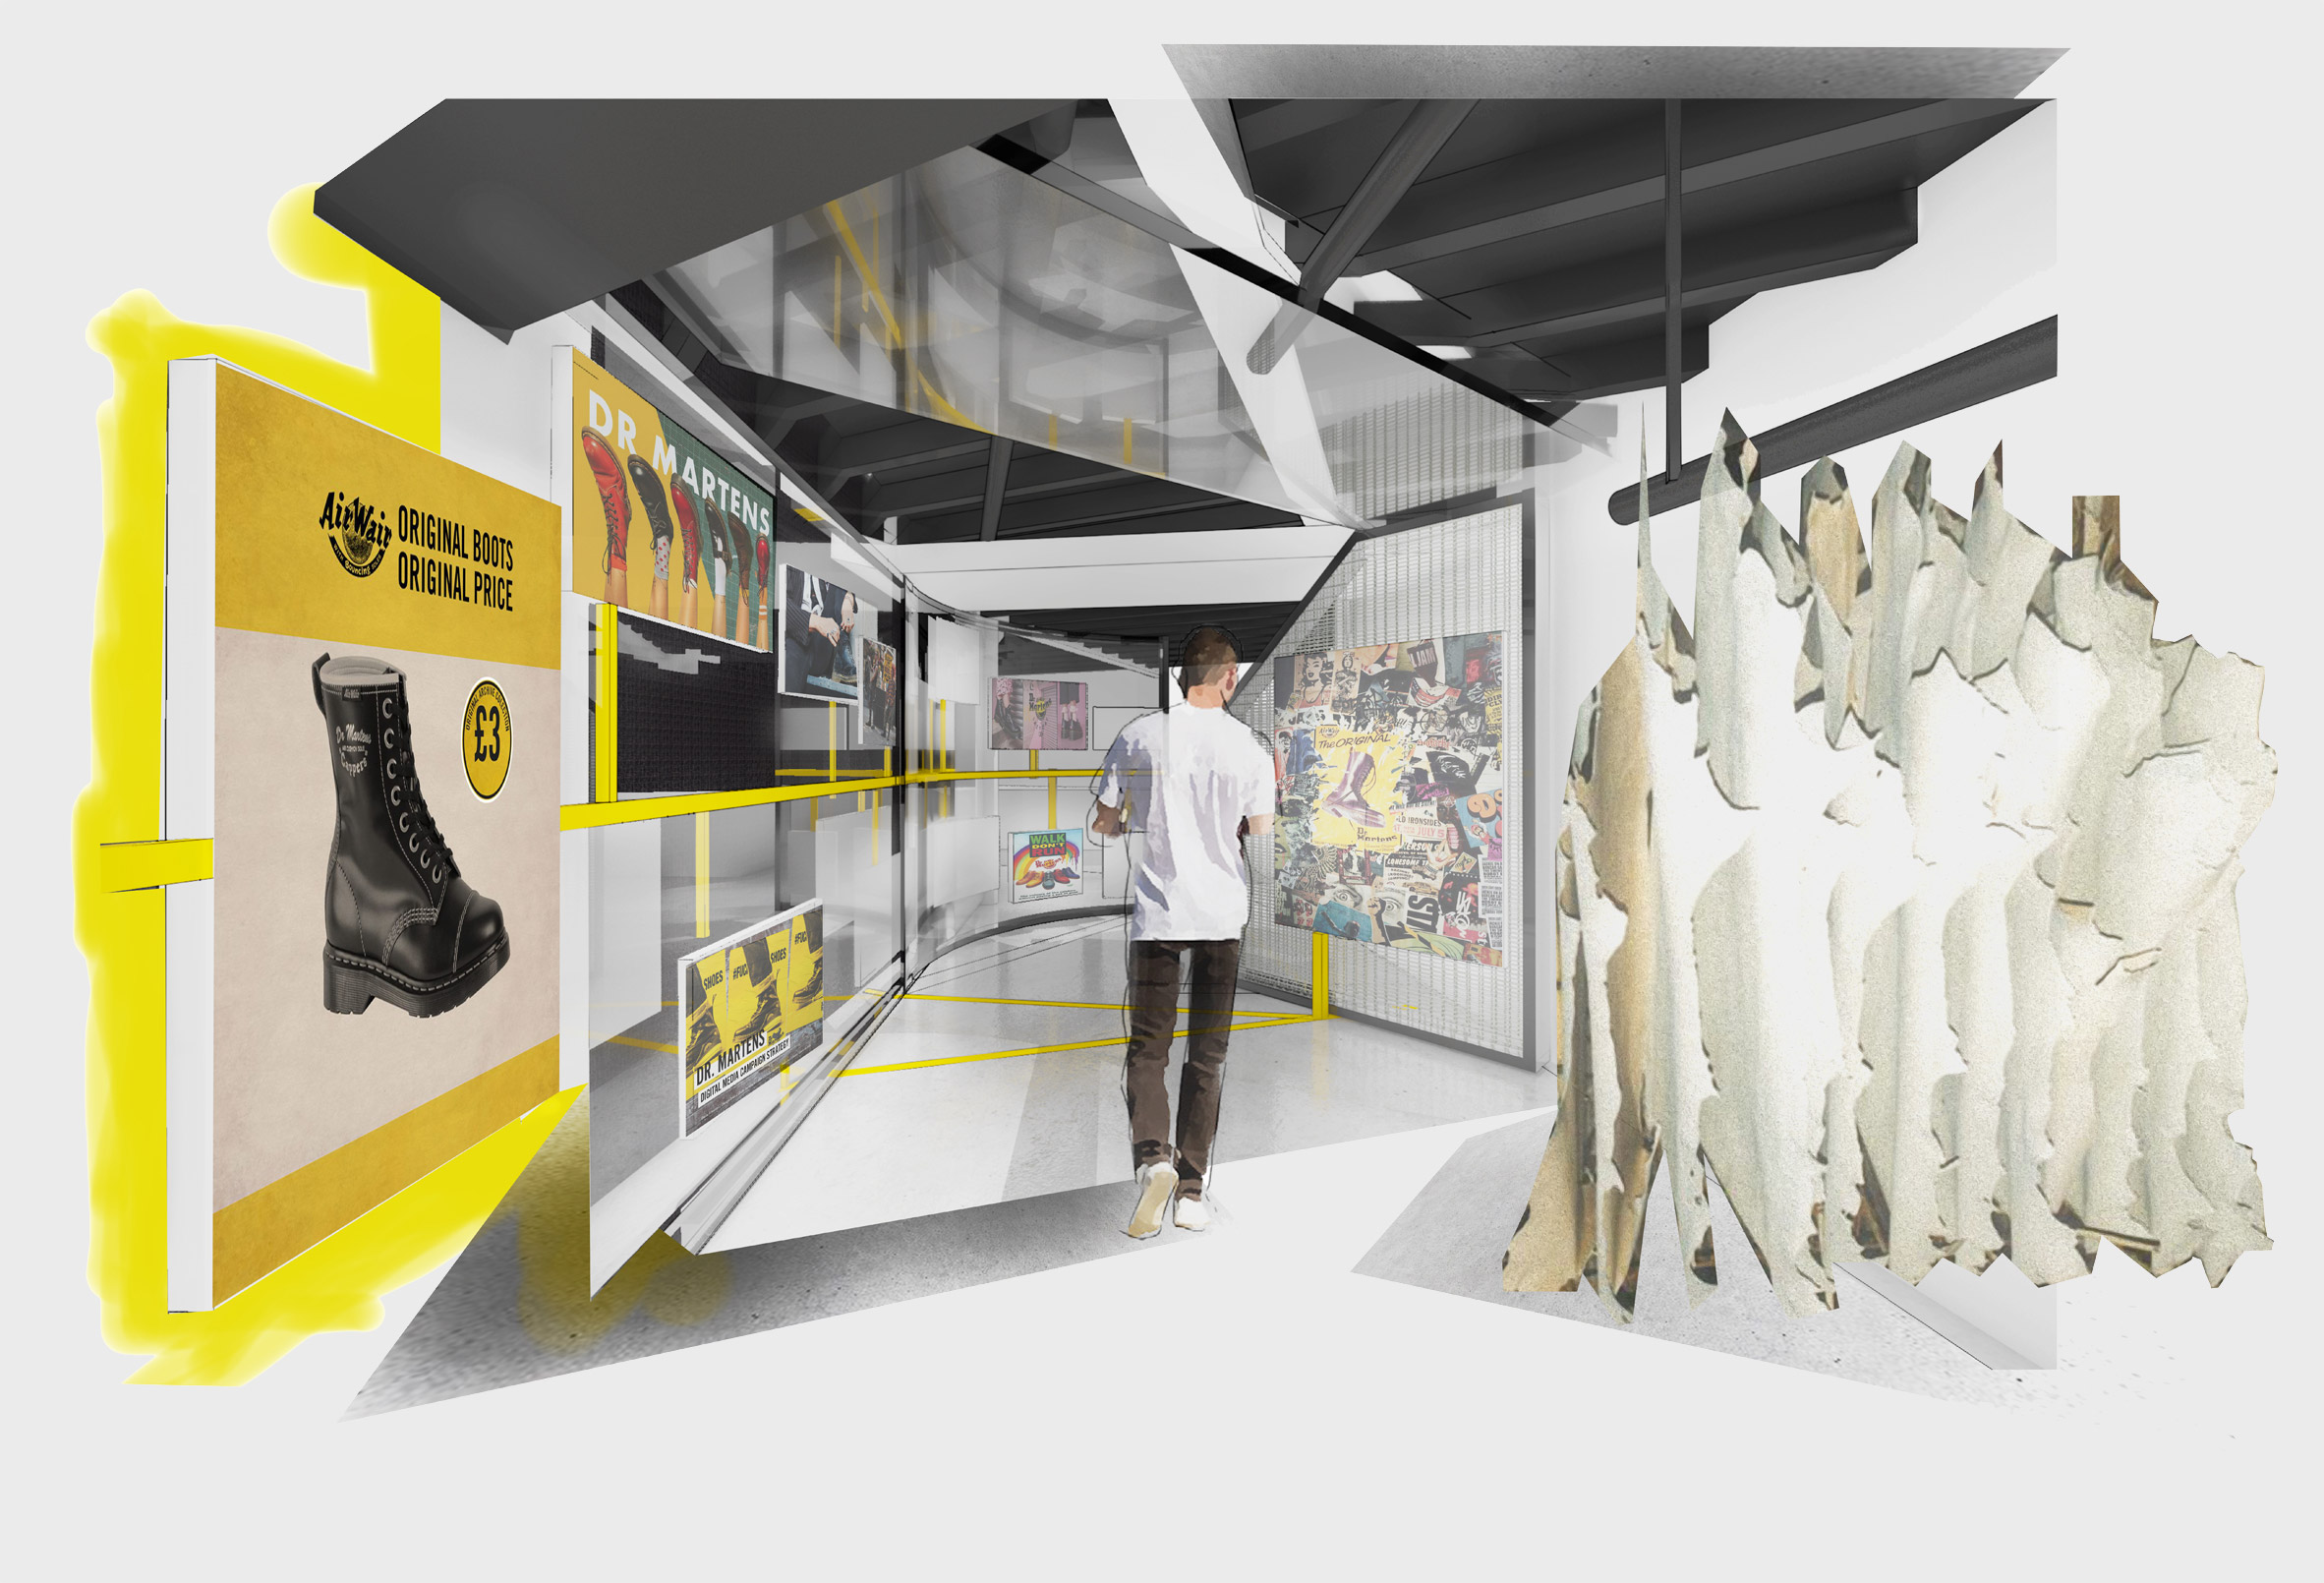 Collage rendering of a Dr Martens exhibition